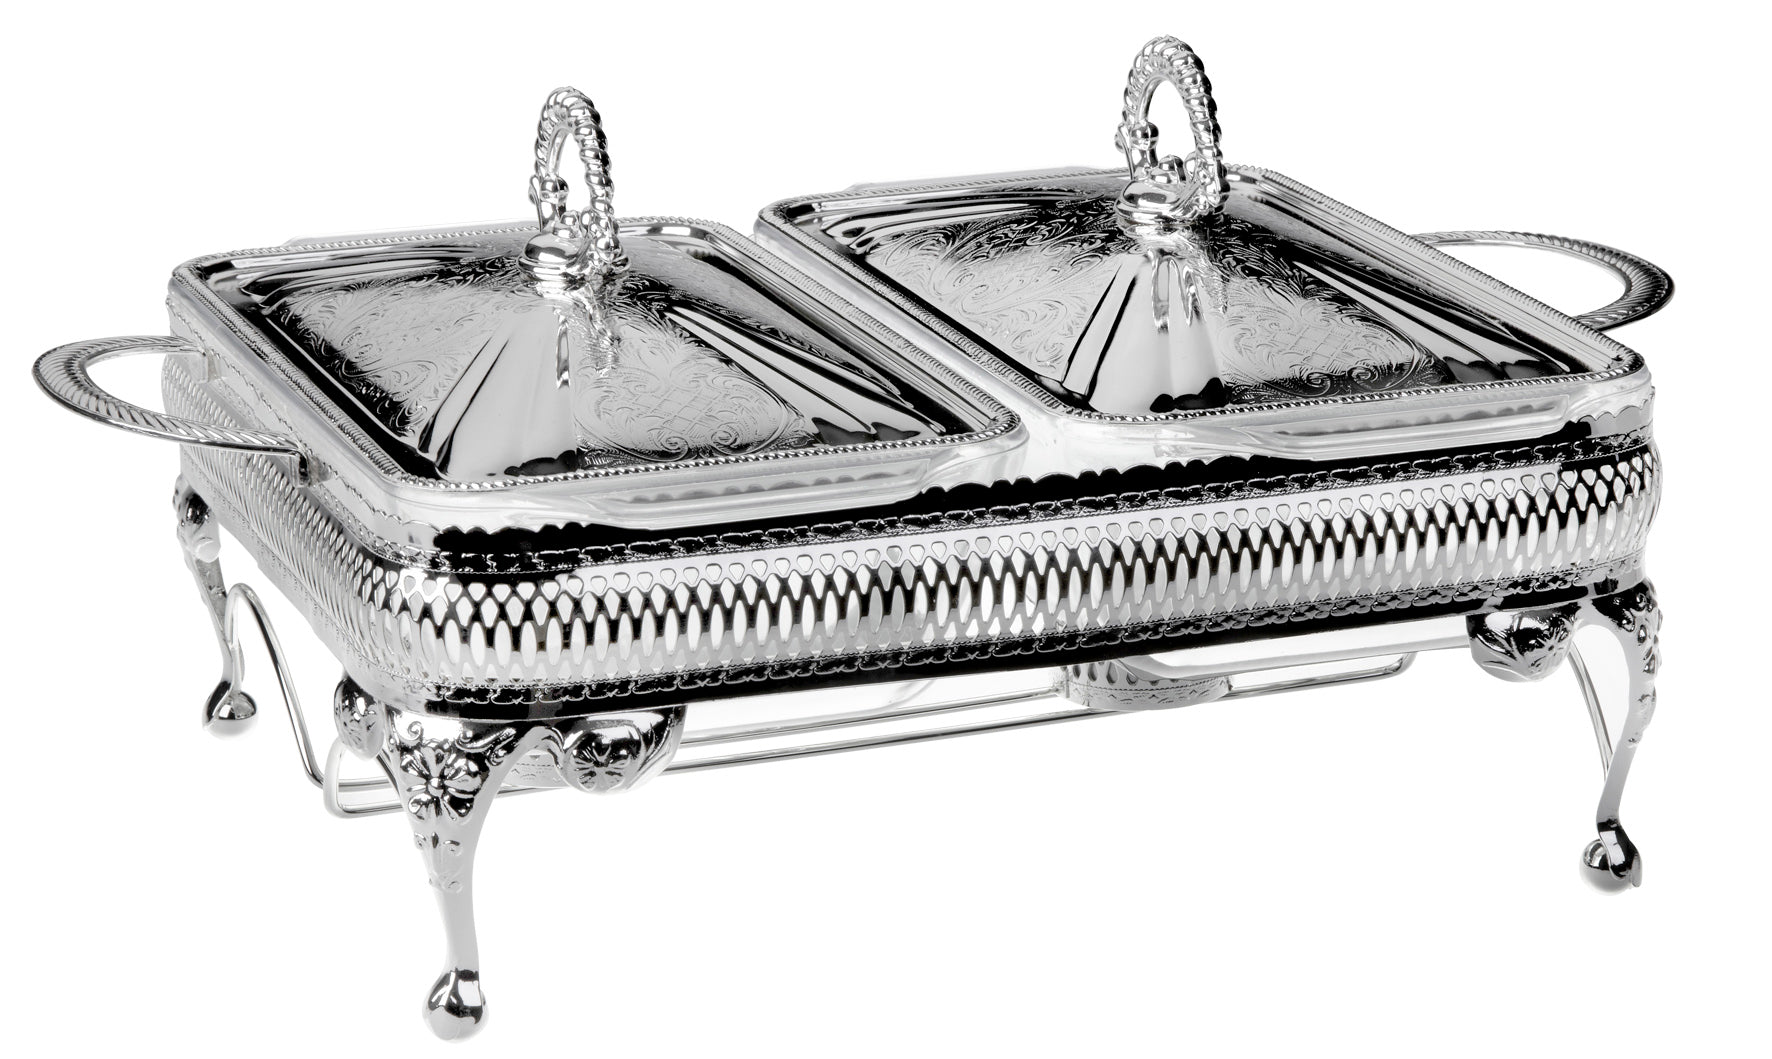 Queen Anne Double Casserole Dish with Warmer - Royal Gift